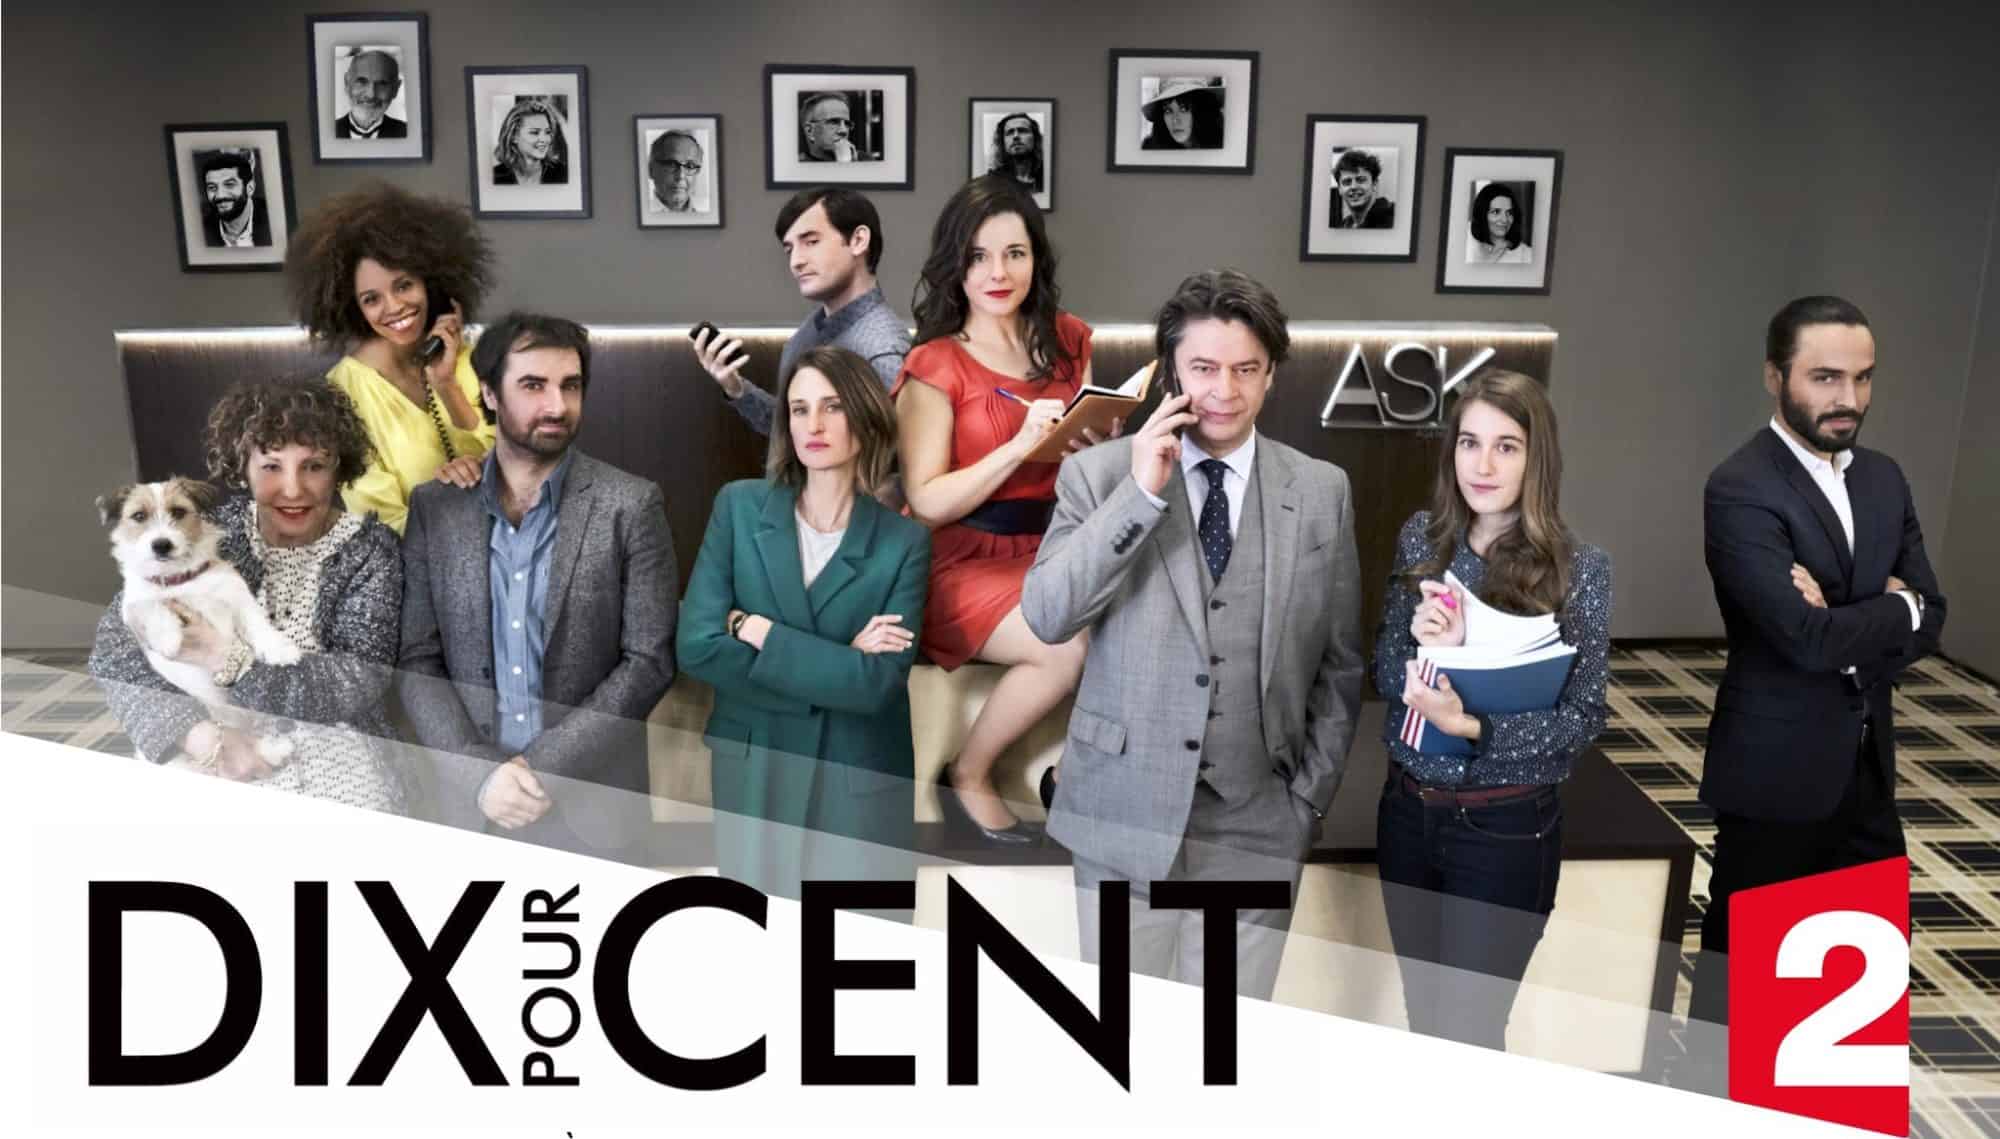 The cast of French Netflix series Call my agent or "Dix Pour Cent" in French, which is perfect for watching while on lockdown during the Covid-19 lockdown.